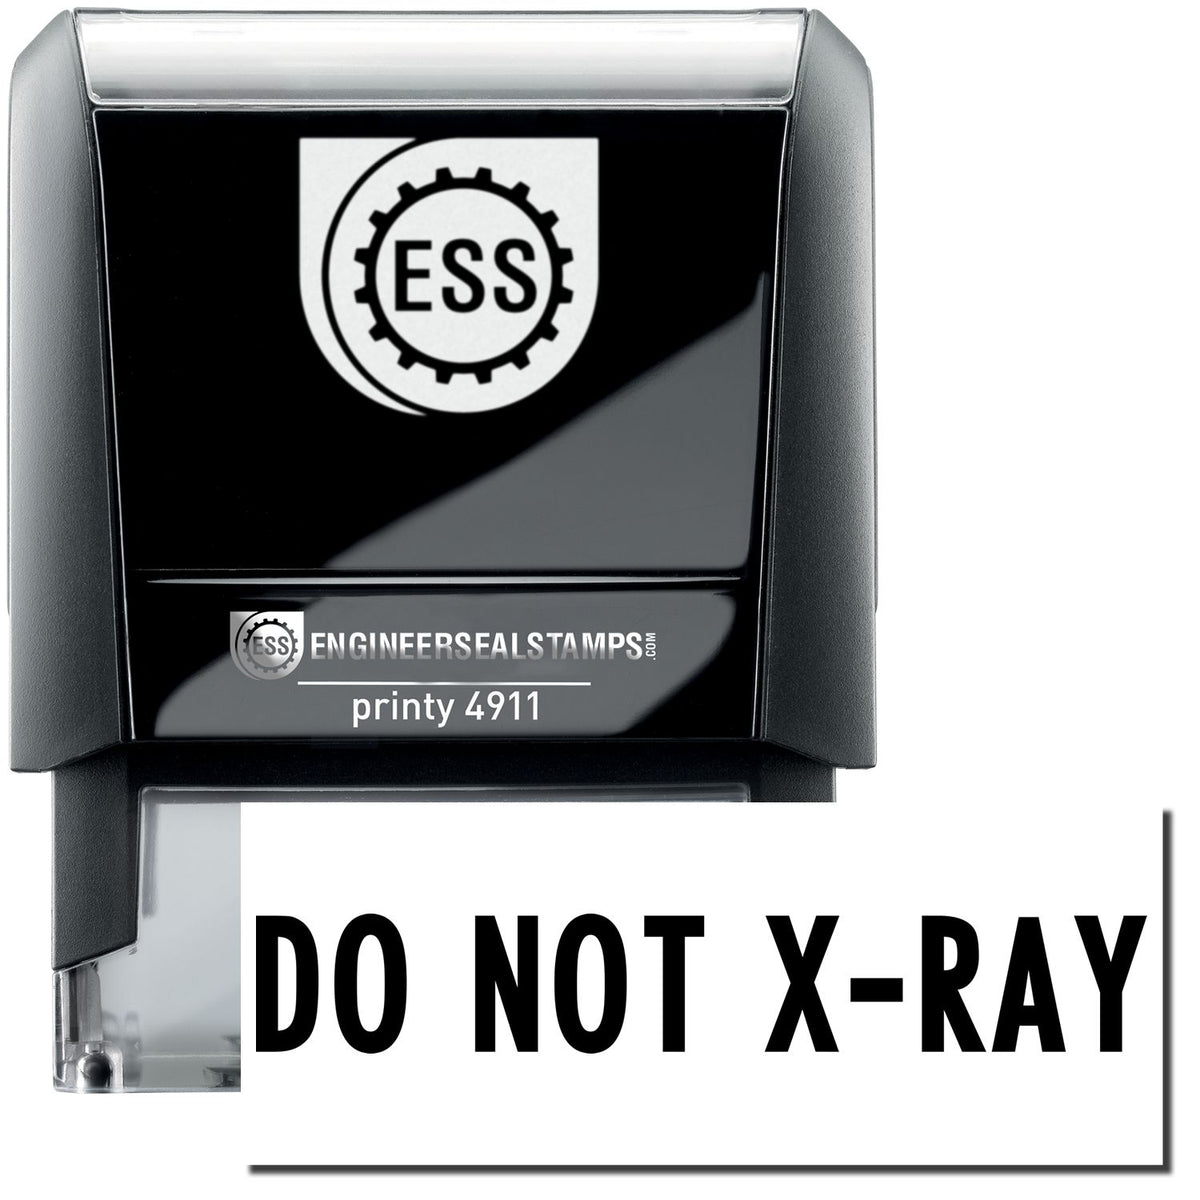 A self-inking stamp with a stamped image showing how the text &quot;DO NOT X-RAY&quot; is displayed after stamping.